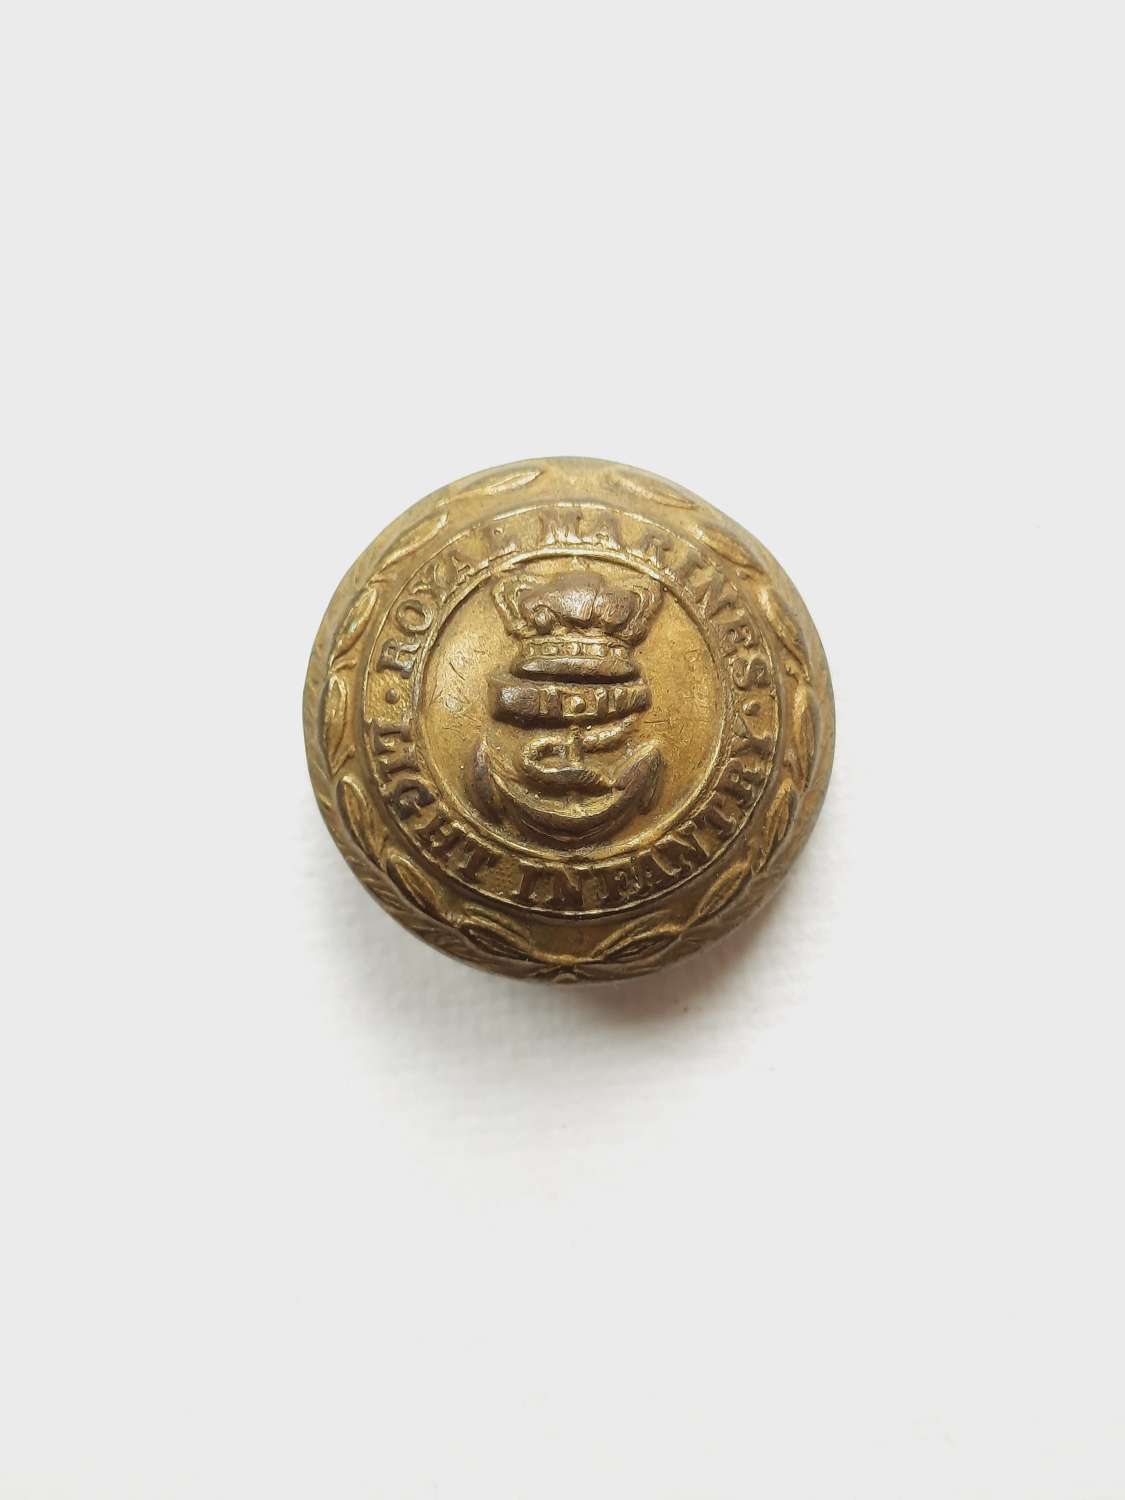 Victorian Royal Marines Light Infantry Button